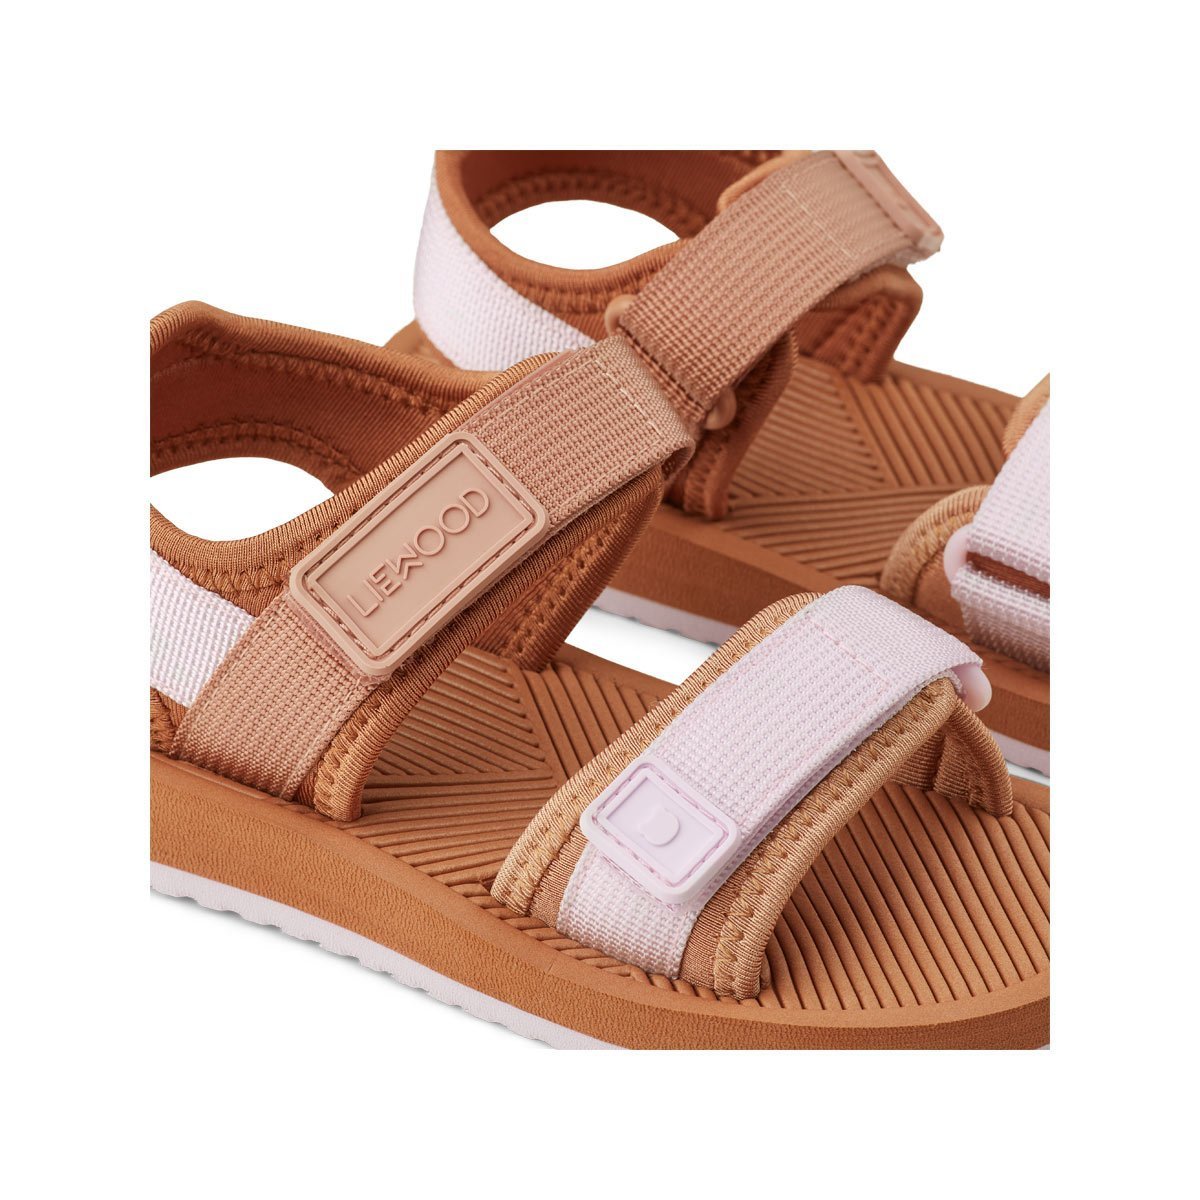 Liewood Monty Sandals in Tuscany Rose Multi Mix - Scandibørn